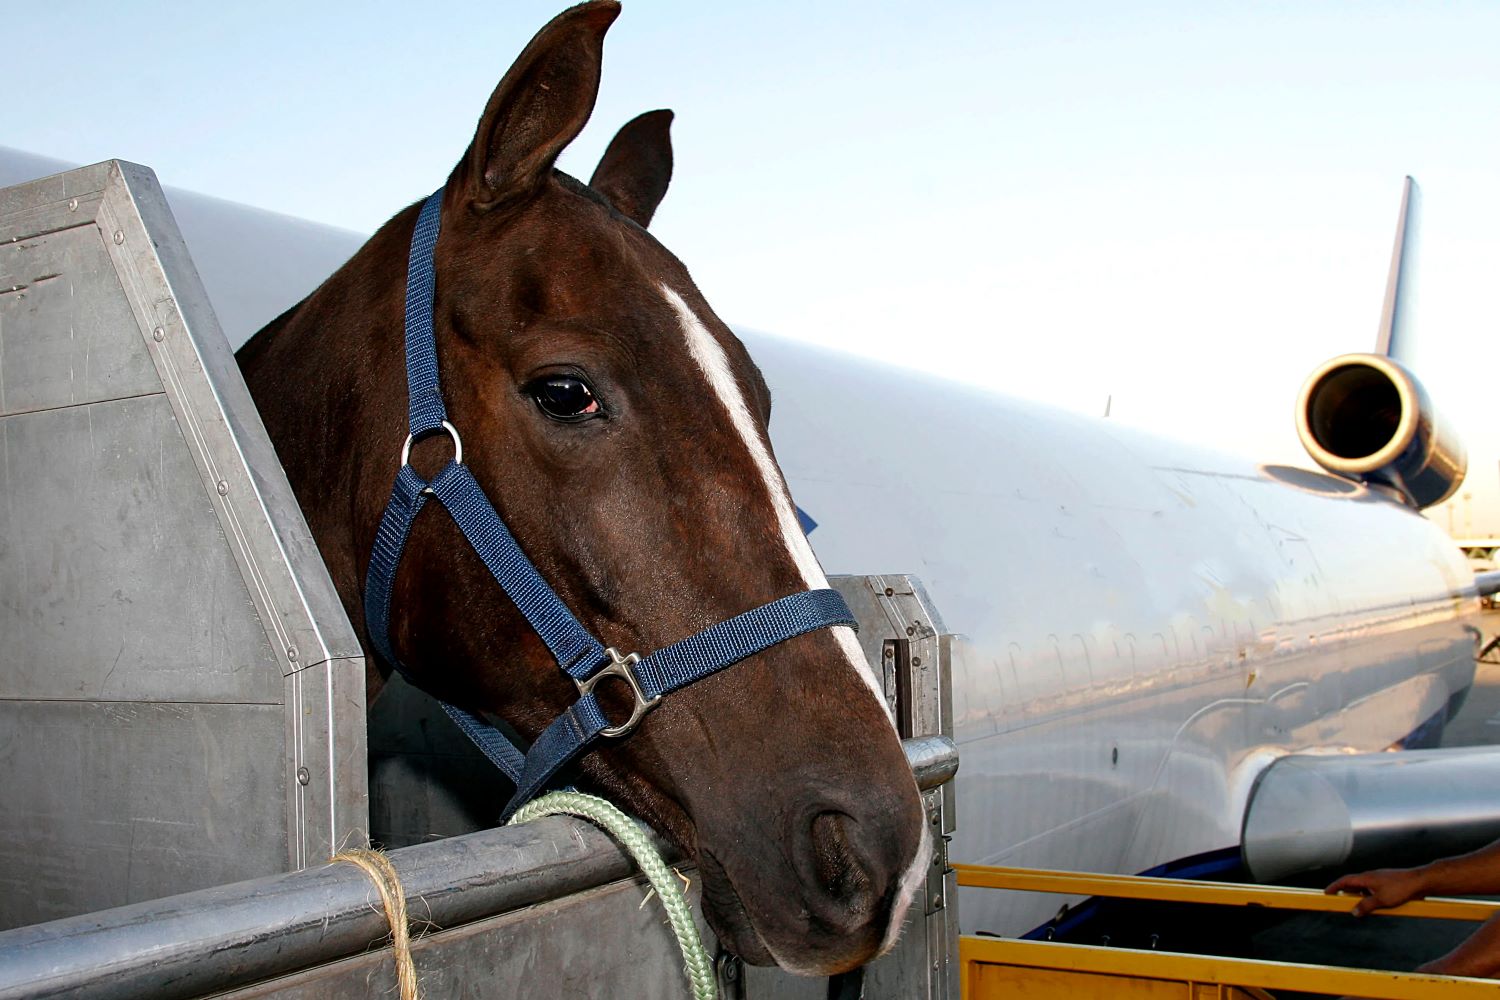 horse-escapes-planes-cargo-hold-forces-emergency-landing-in-nyc